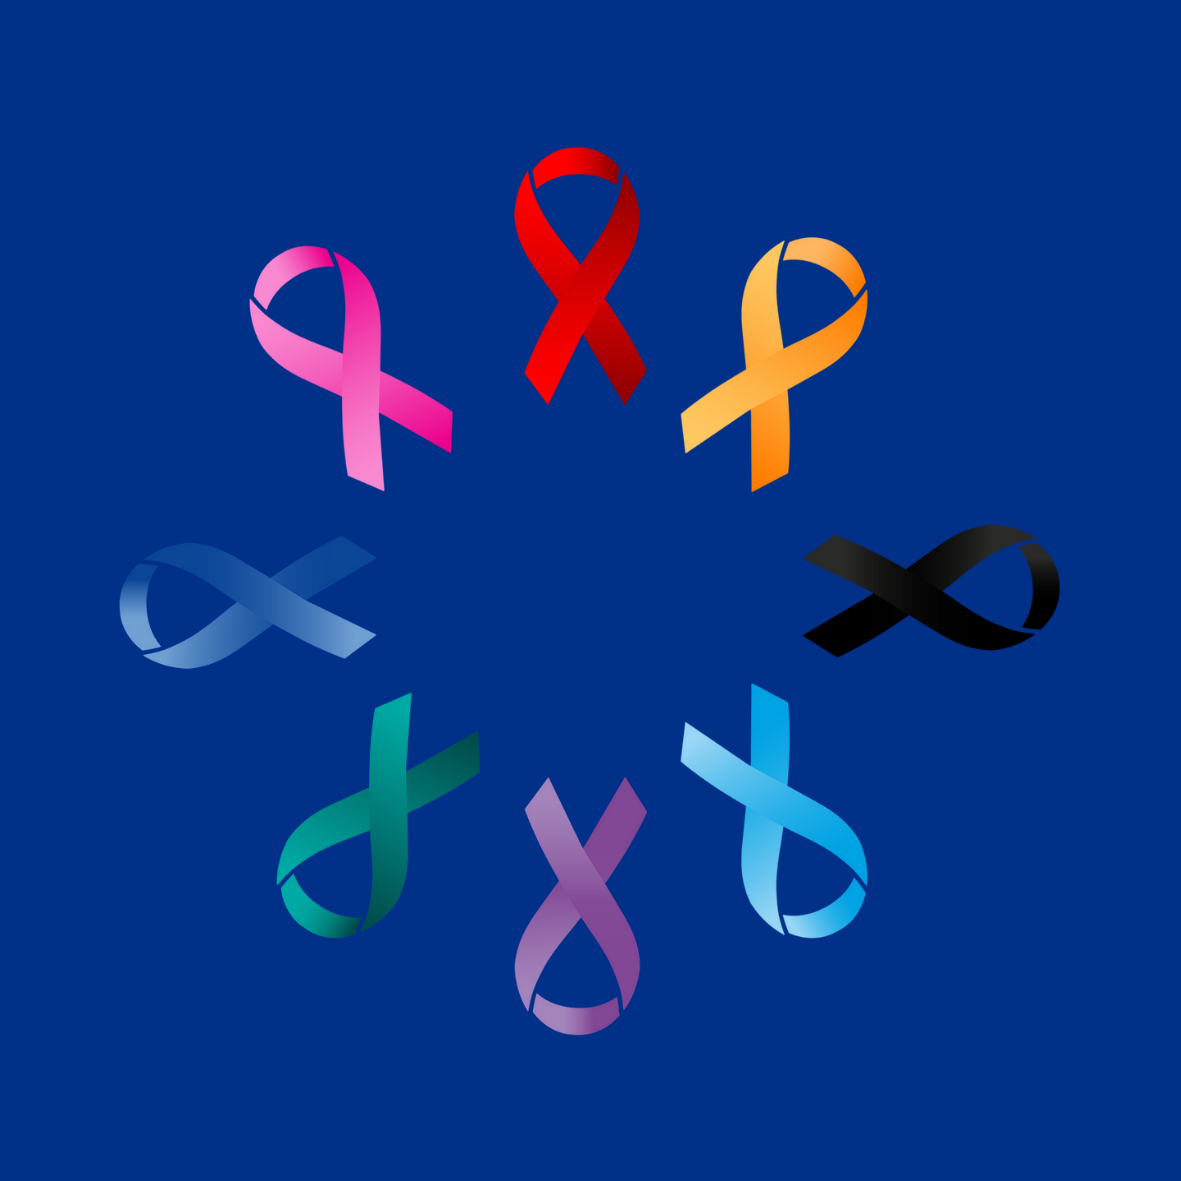 Image of Ribbons Representing Different Types of Cancer